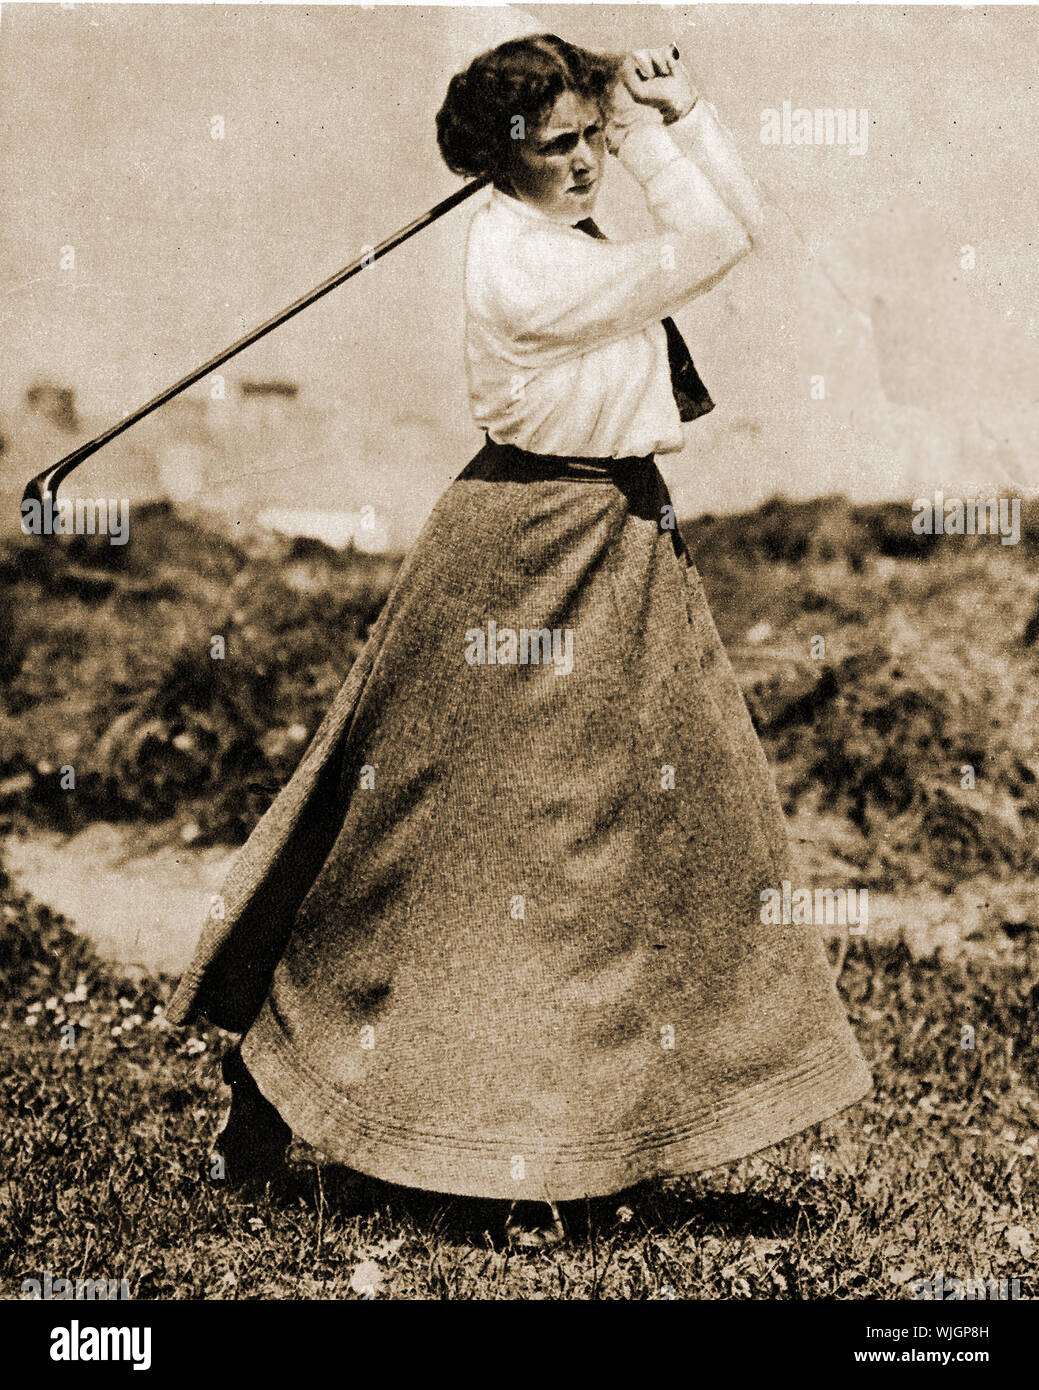 Women playing traditional sports in 1911. A female playing golf in a   a formal long skirt Stock Photo